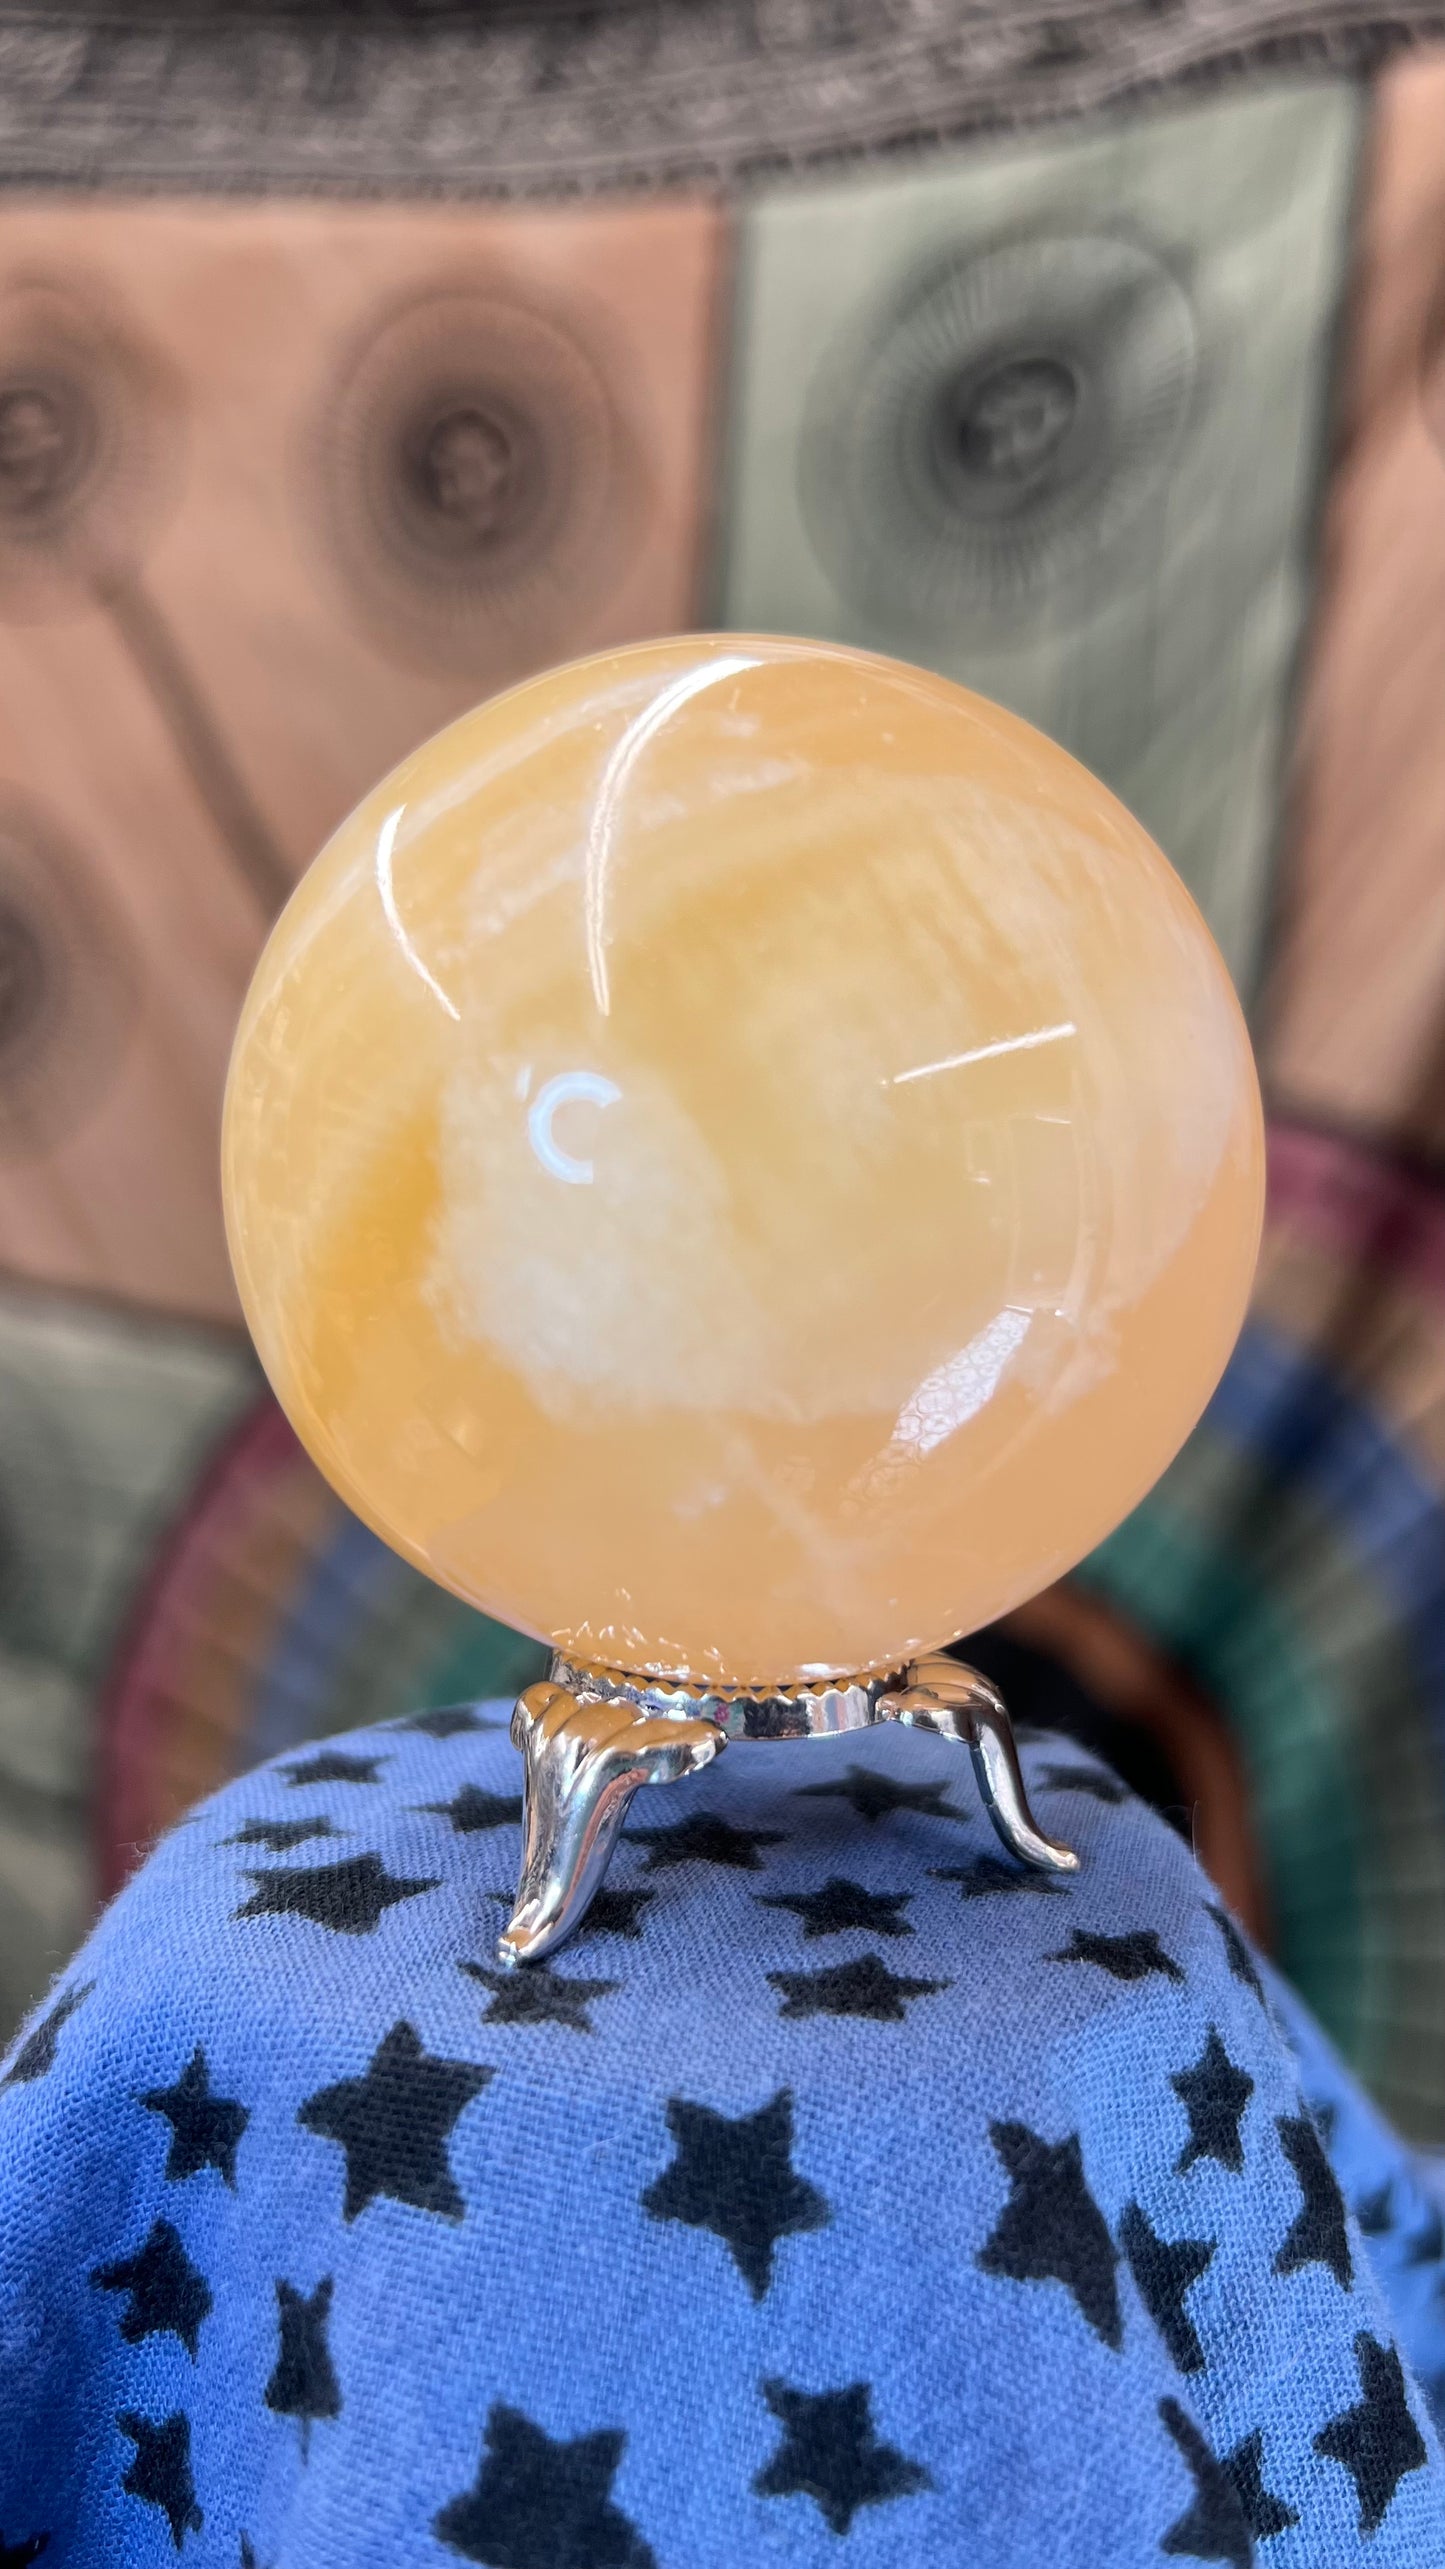 Orange Calcite Sphere with Display Stand